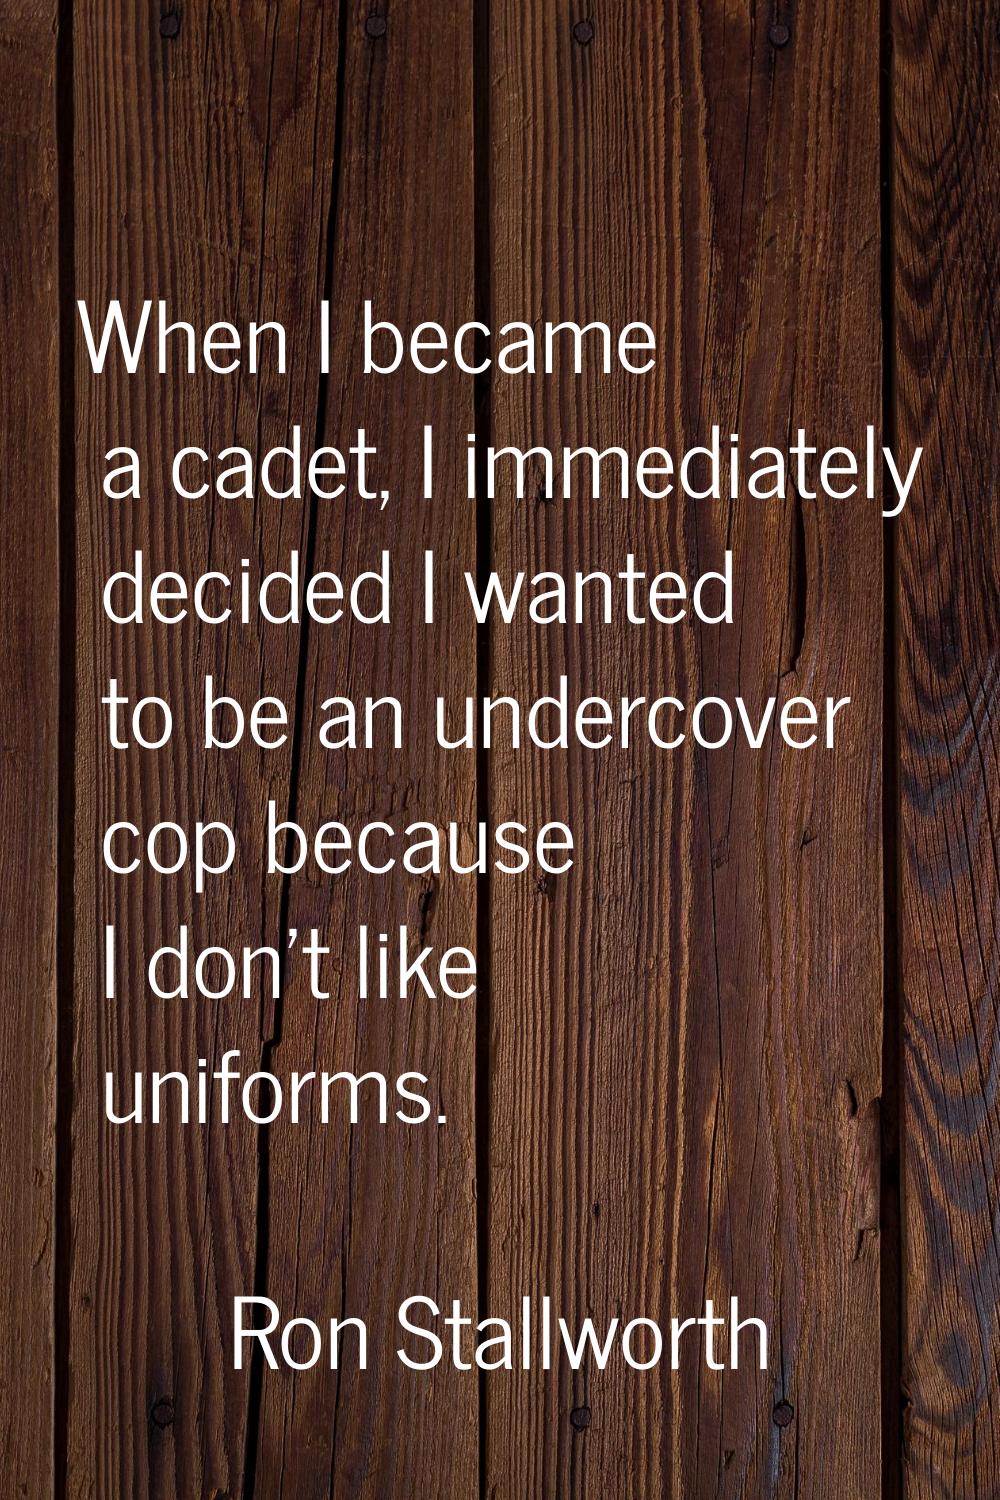 When I became a cadet, I immediately decided I wanted to be an undercover cop because I don't like 